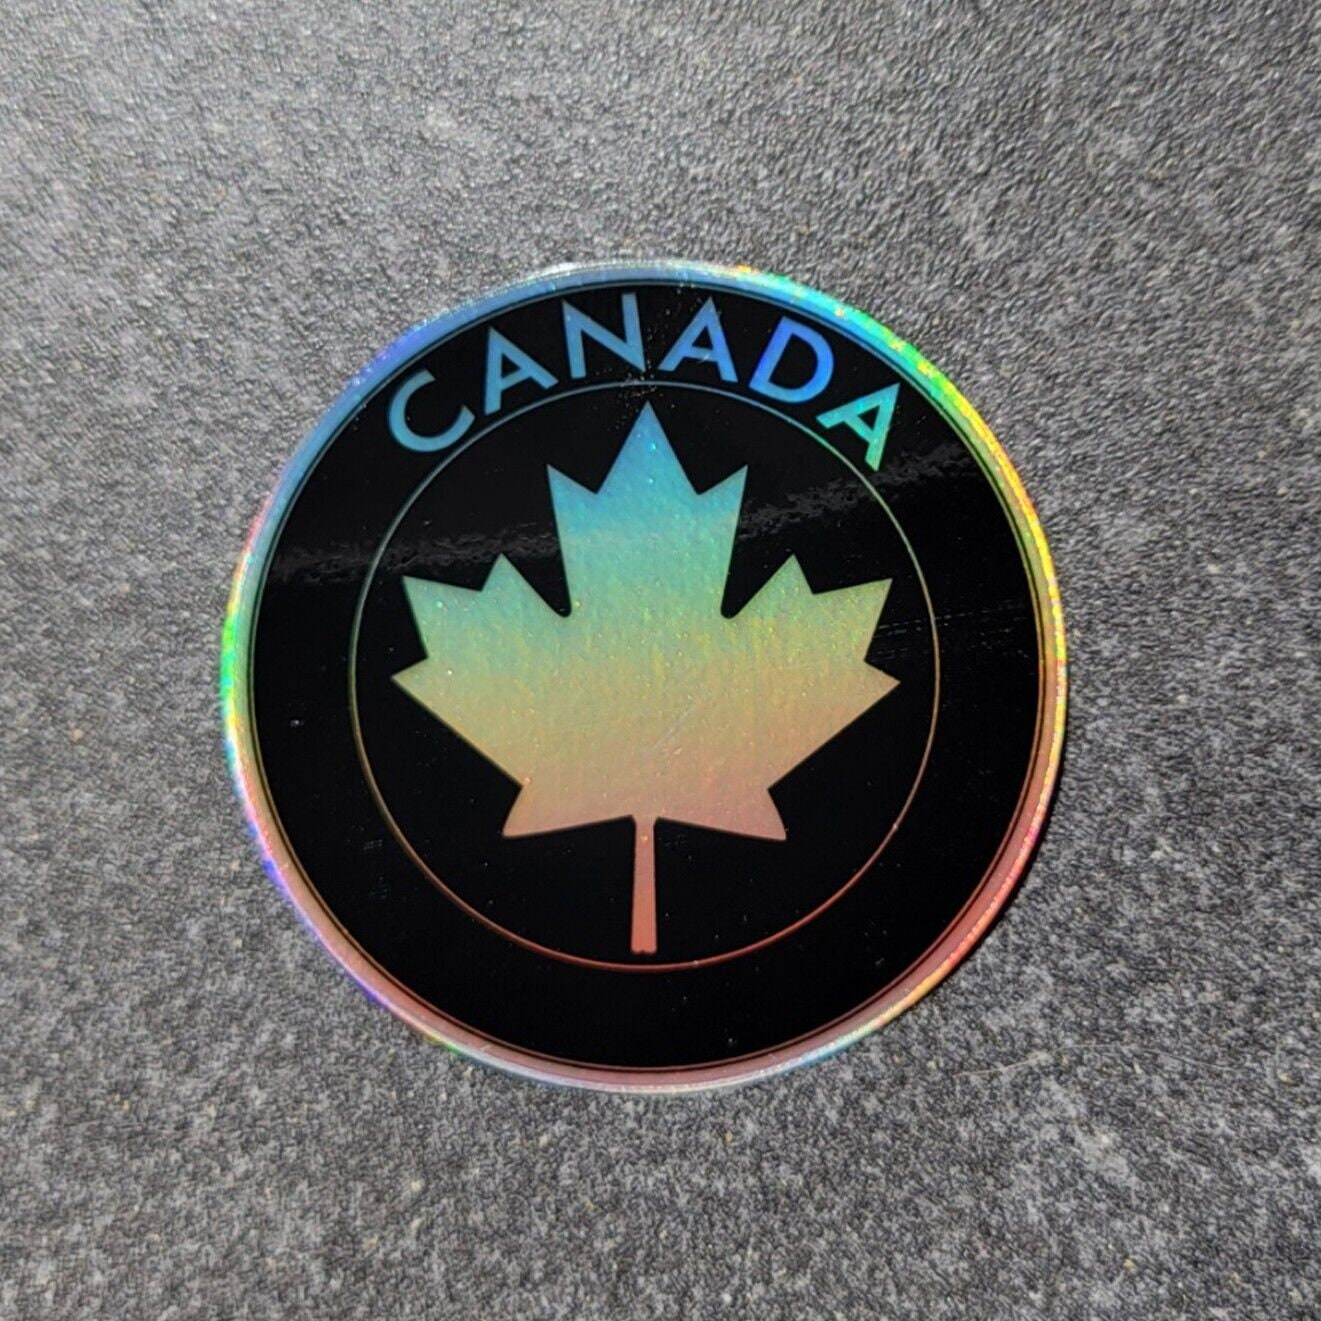 Canada Holographic Decal Sticker 3" Hologram Indoor Or Outdoor